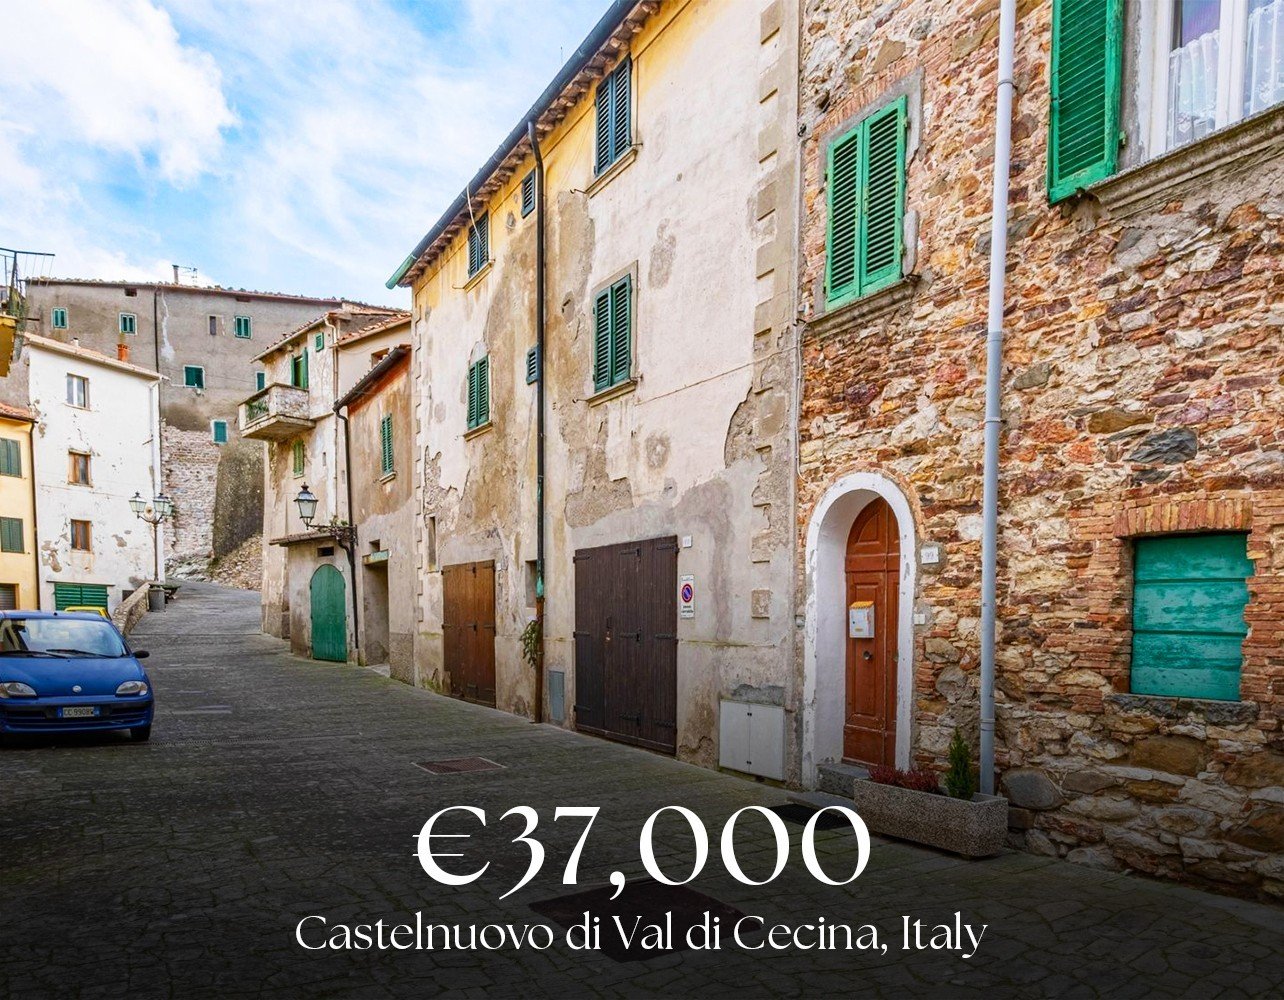 Set your sights on a unique opportunity in the heart of Castelnuovo di Val di Cecina with this inviting duplex. With its vintage charm and 1967 origins, this 85 sqm space is a time capsule waiting for a touch of modern magic. Picture yourself strolli